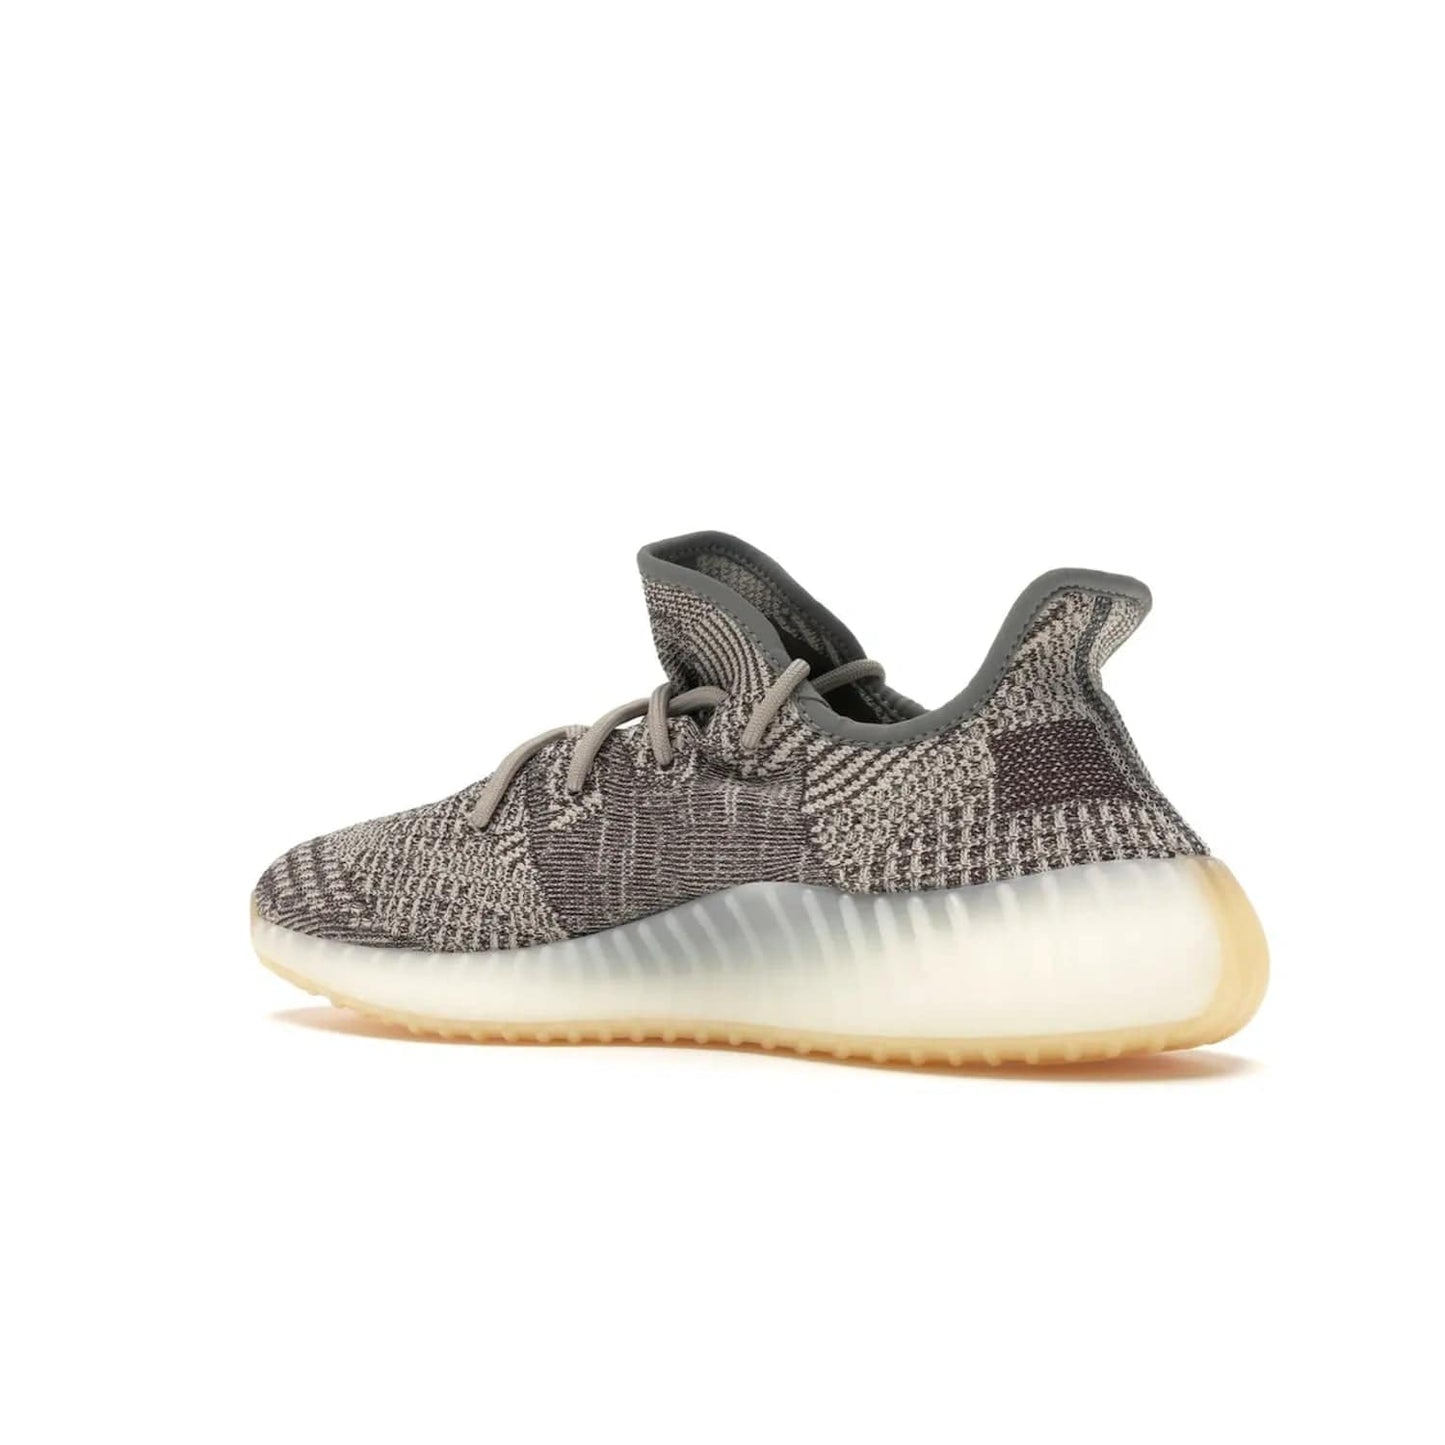 adidas Yeezy Boost 350 V2 Zyon - Image 22 - Only at www.BallersClubKickz.com - Step up your style game with the adidas Yeezy Boost 350 V2 Zyon. This sleek sneaker features a Primeknit upper, dark side stripe, translucent Boost sole, and creamy white interior providing style and comfort. Get them now!